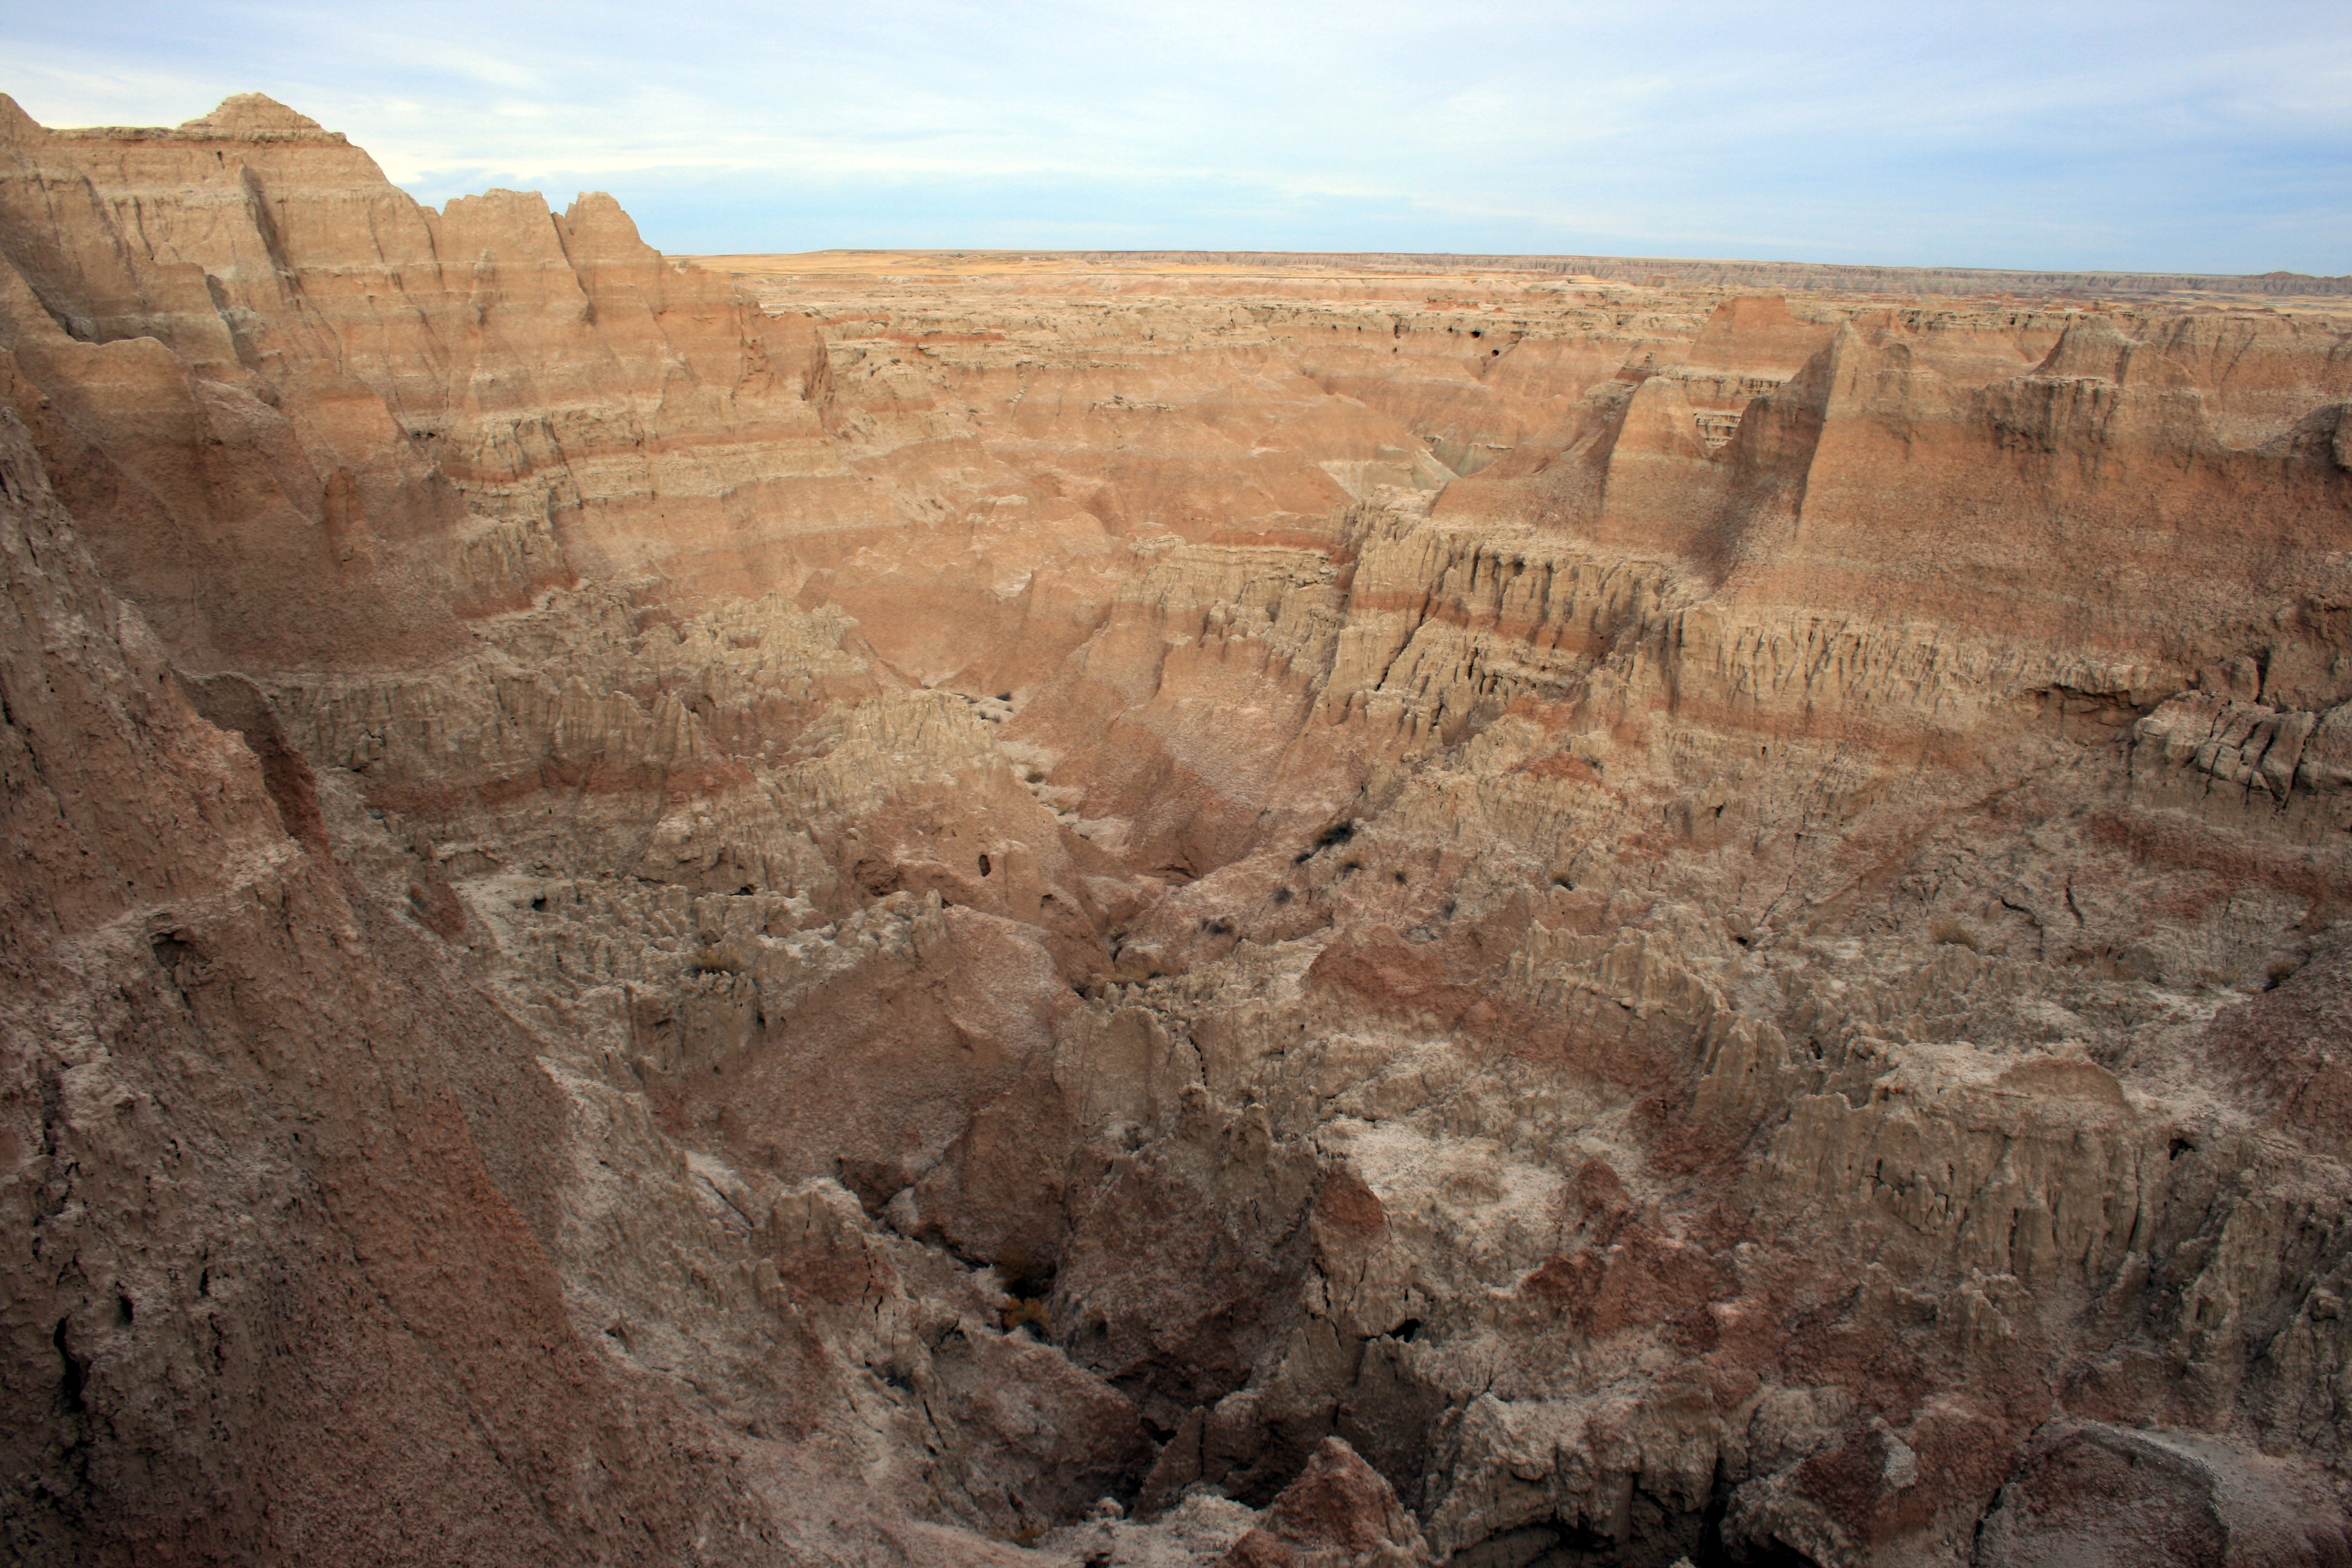 Badlands formations are very rugged and often have sharp peaks.